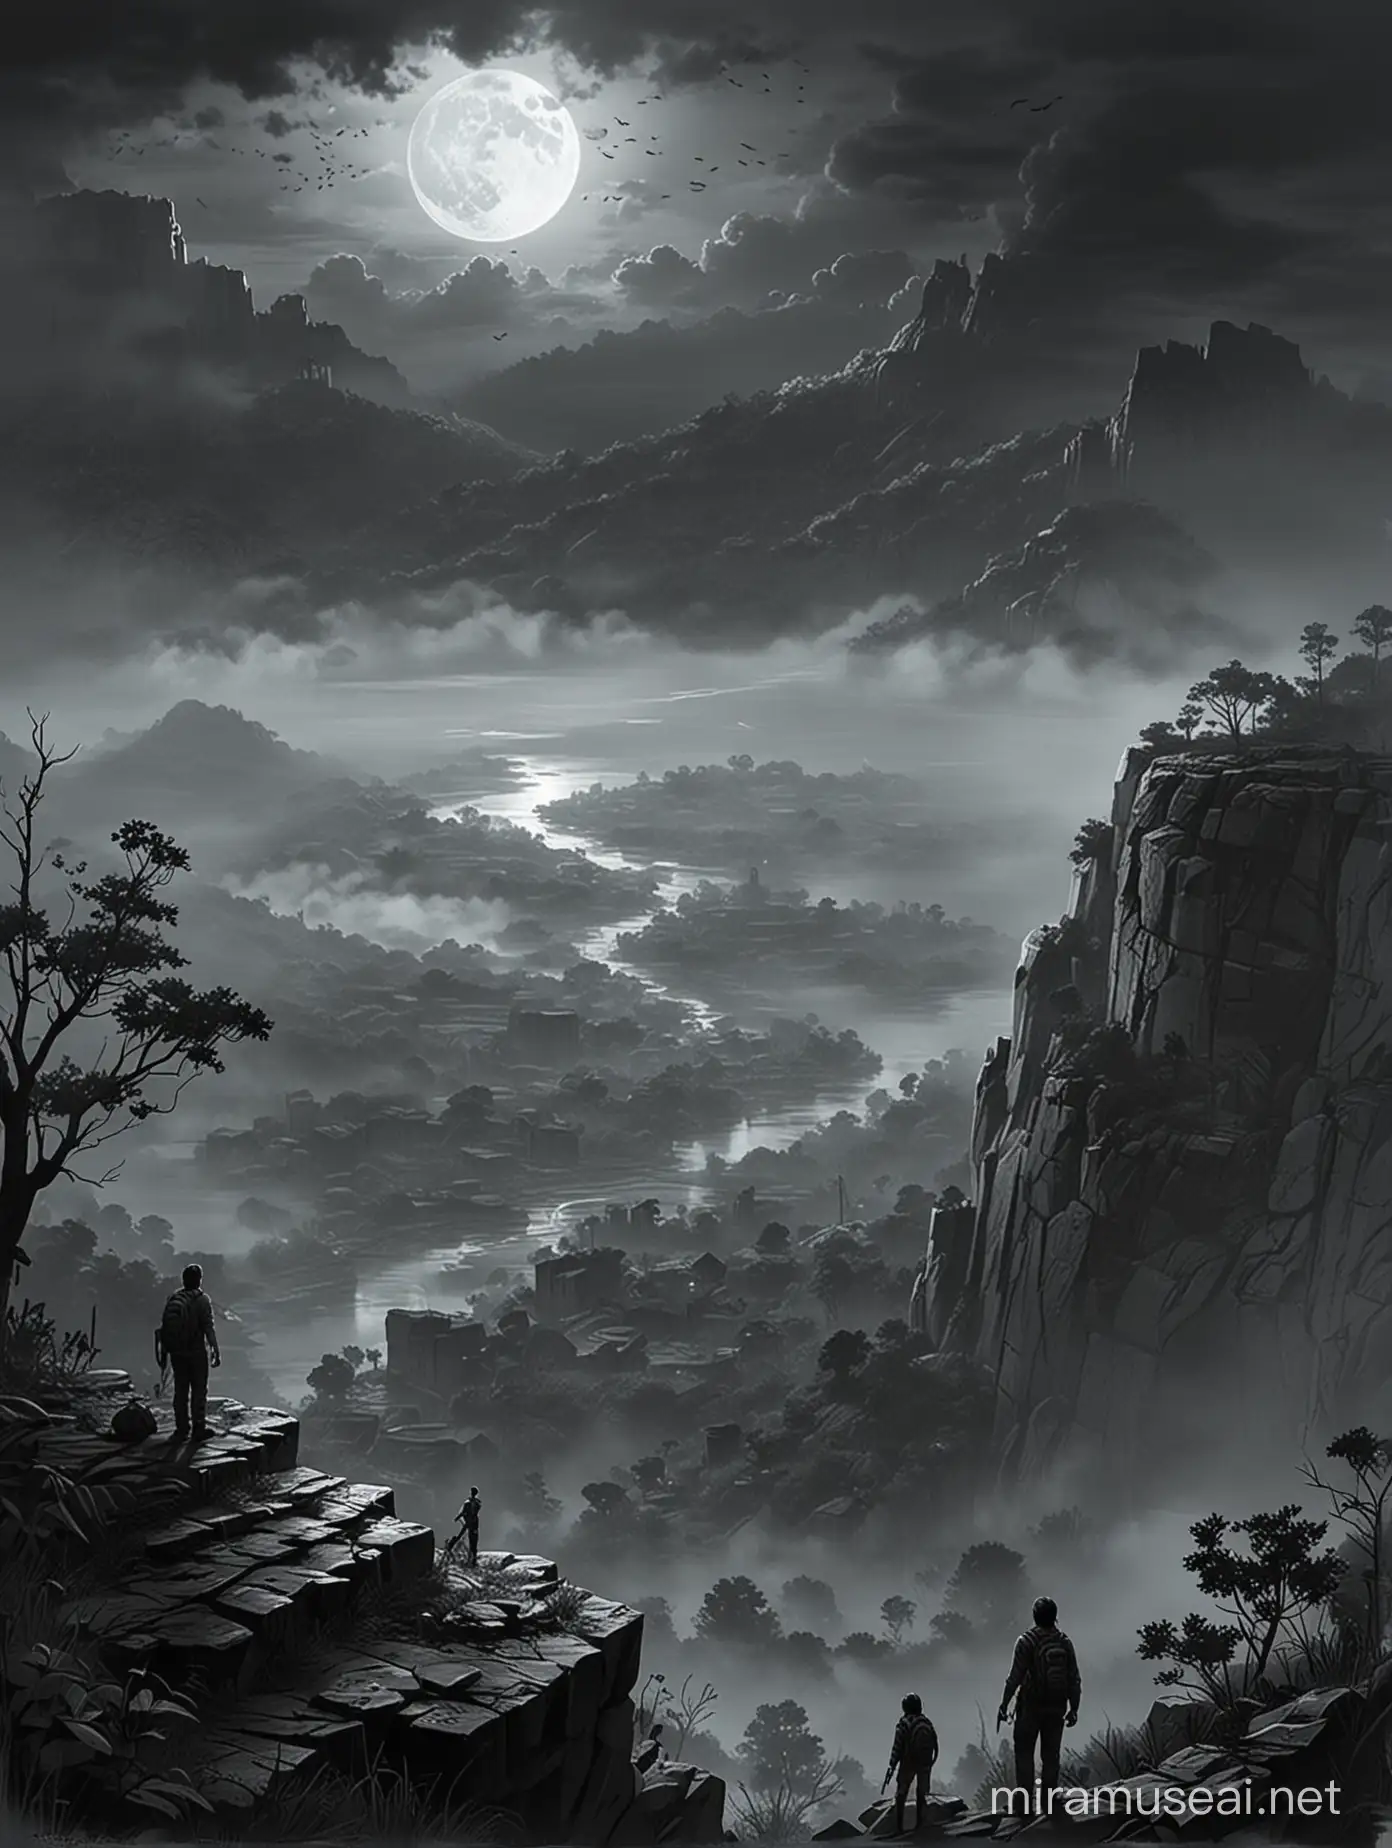 the last of us, abandonned hill station. sketch. A view from the top of a cliff is a dense indian forest covered in fog. Thunder and lightning and the moon in the distance.